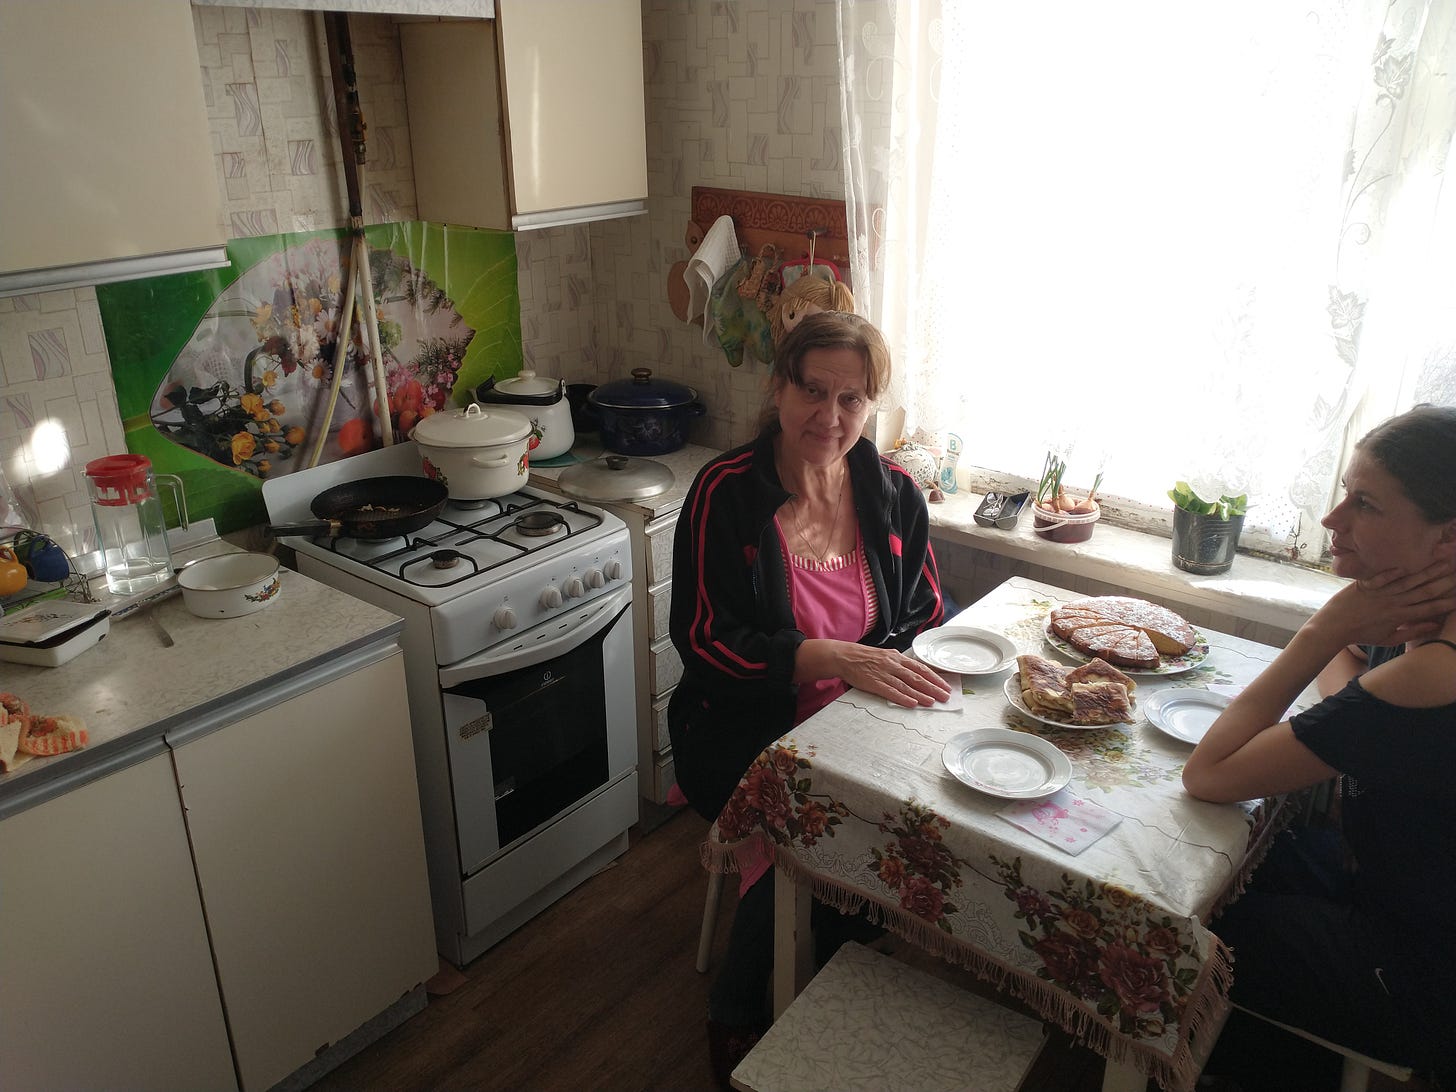 Olga sits with her daughter in their kitchen in Odessa. She has prepared Latkes and cake.